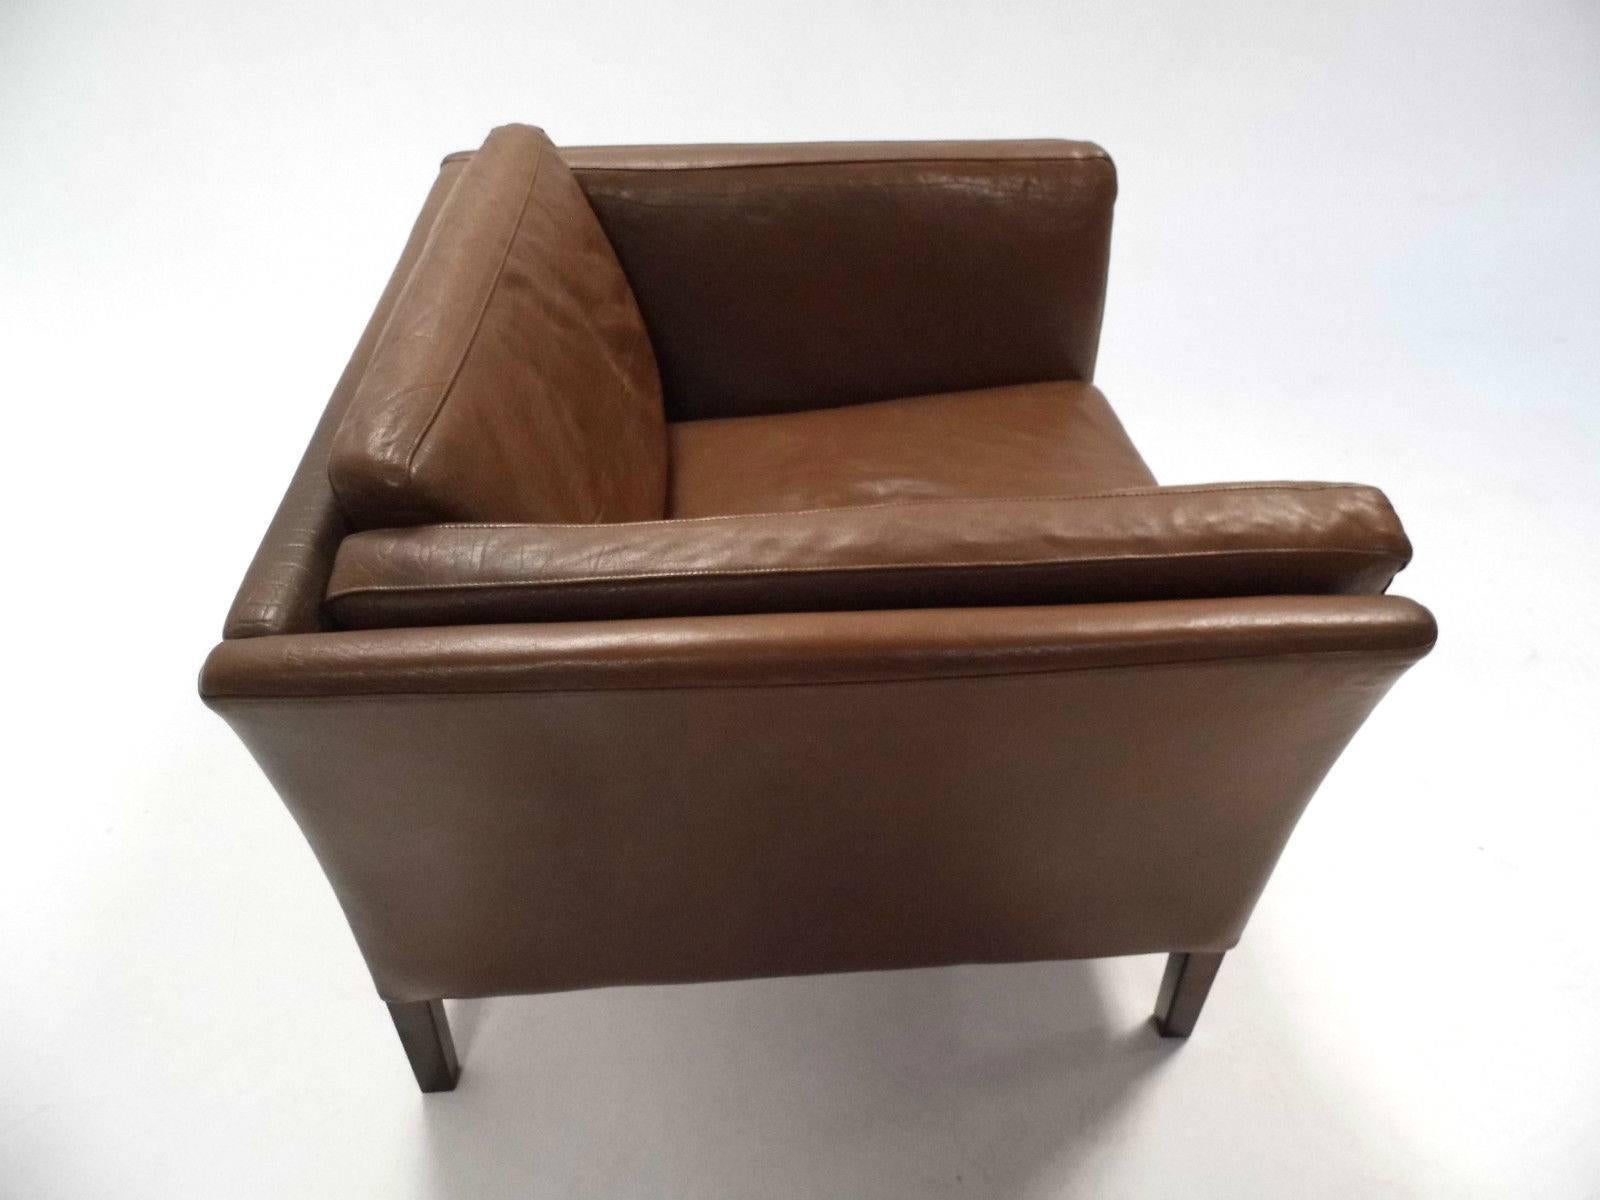 A beautiful Danish brown leather armchair, this would make a stylish addition to any living or work area. The chair has a wide seat pad and padded armrests for enhanced comfort. A striking piece of classically designed Scandinavian furniture.

The